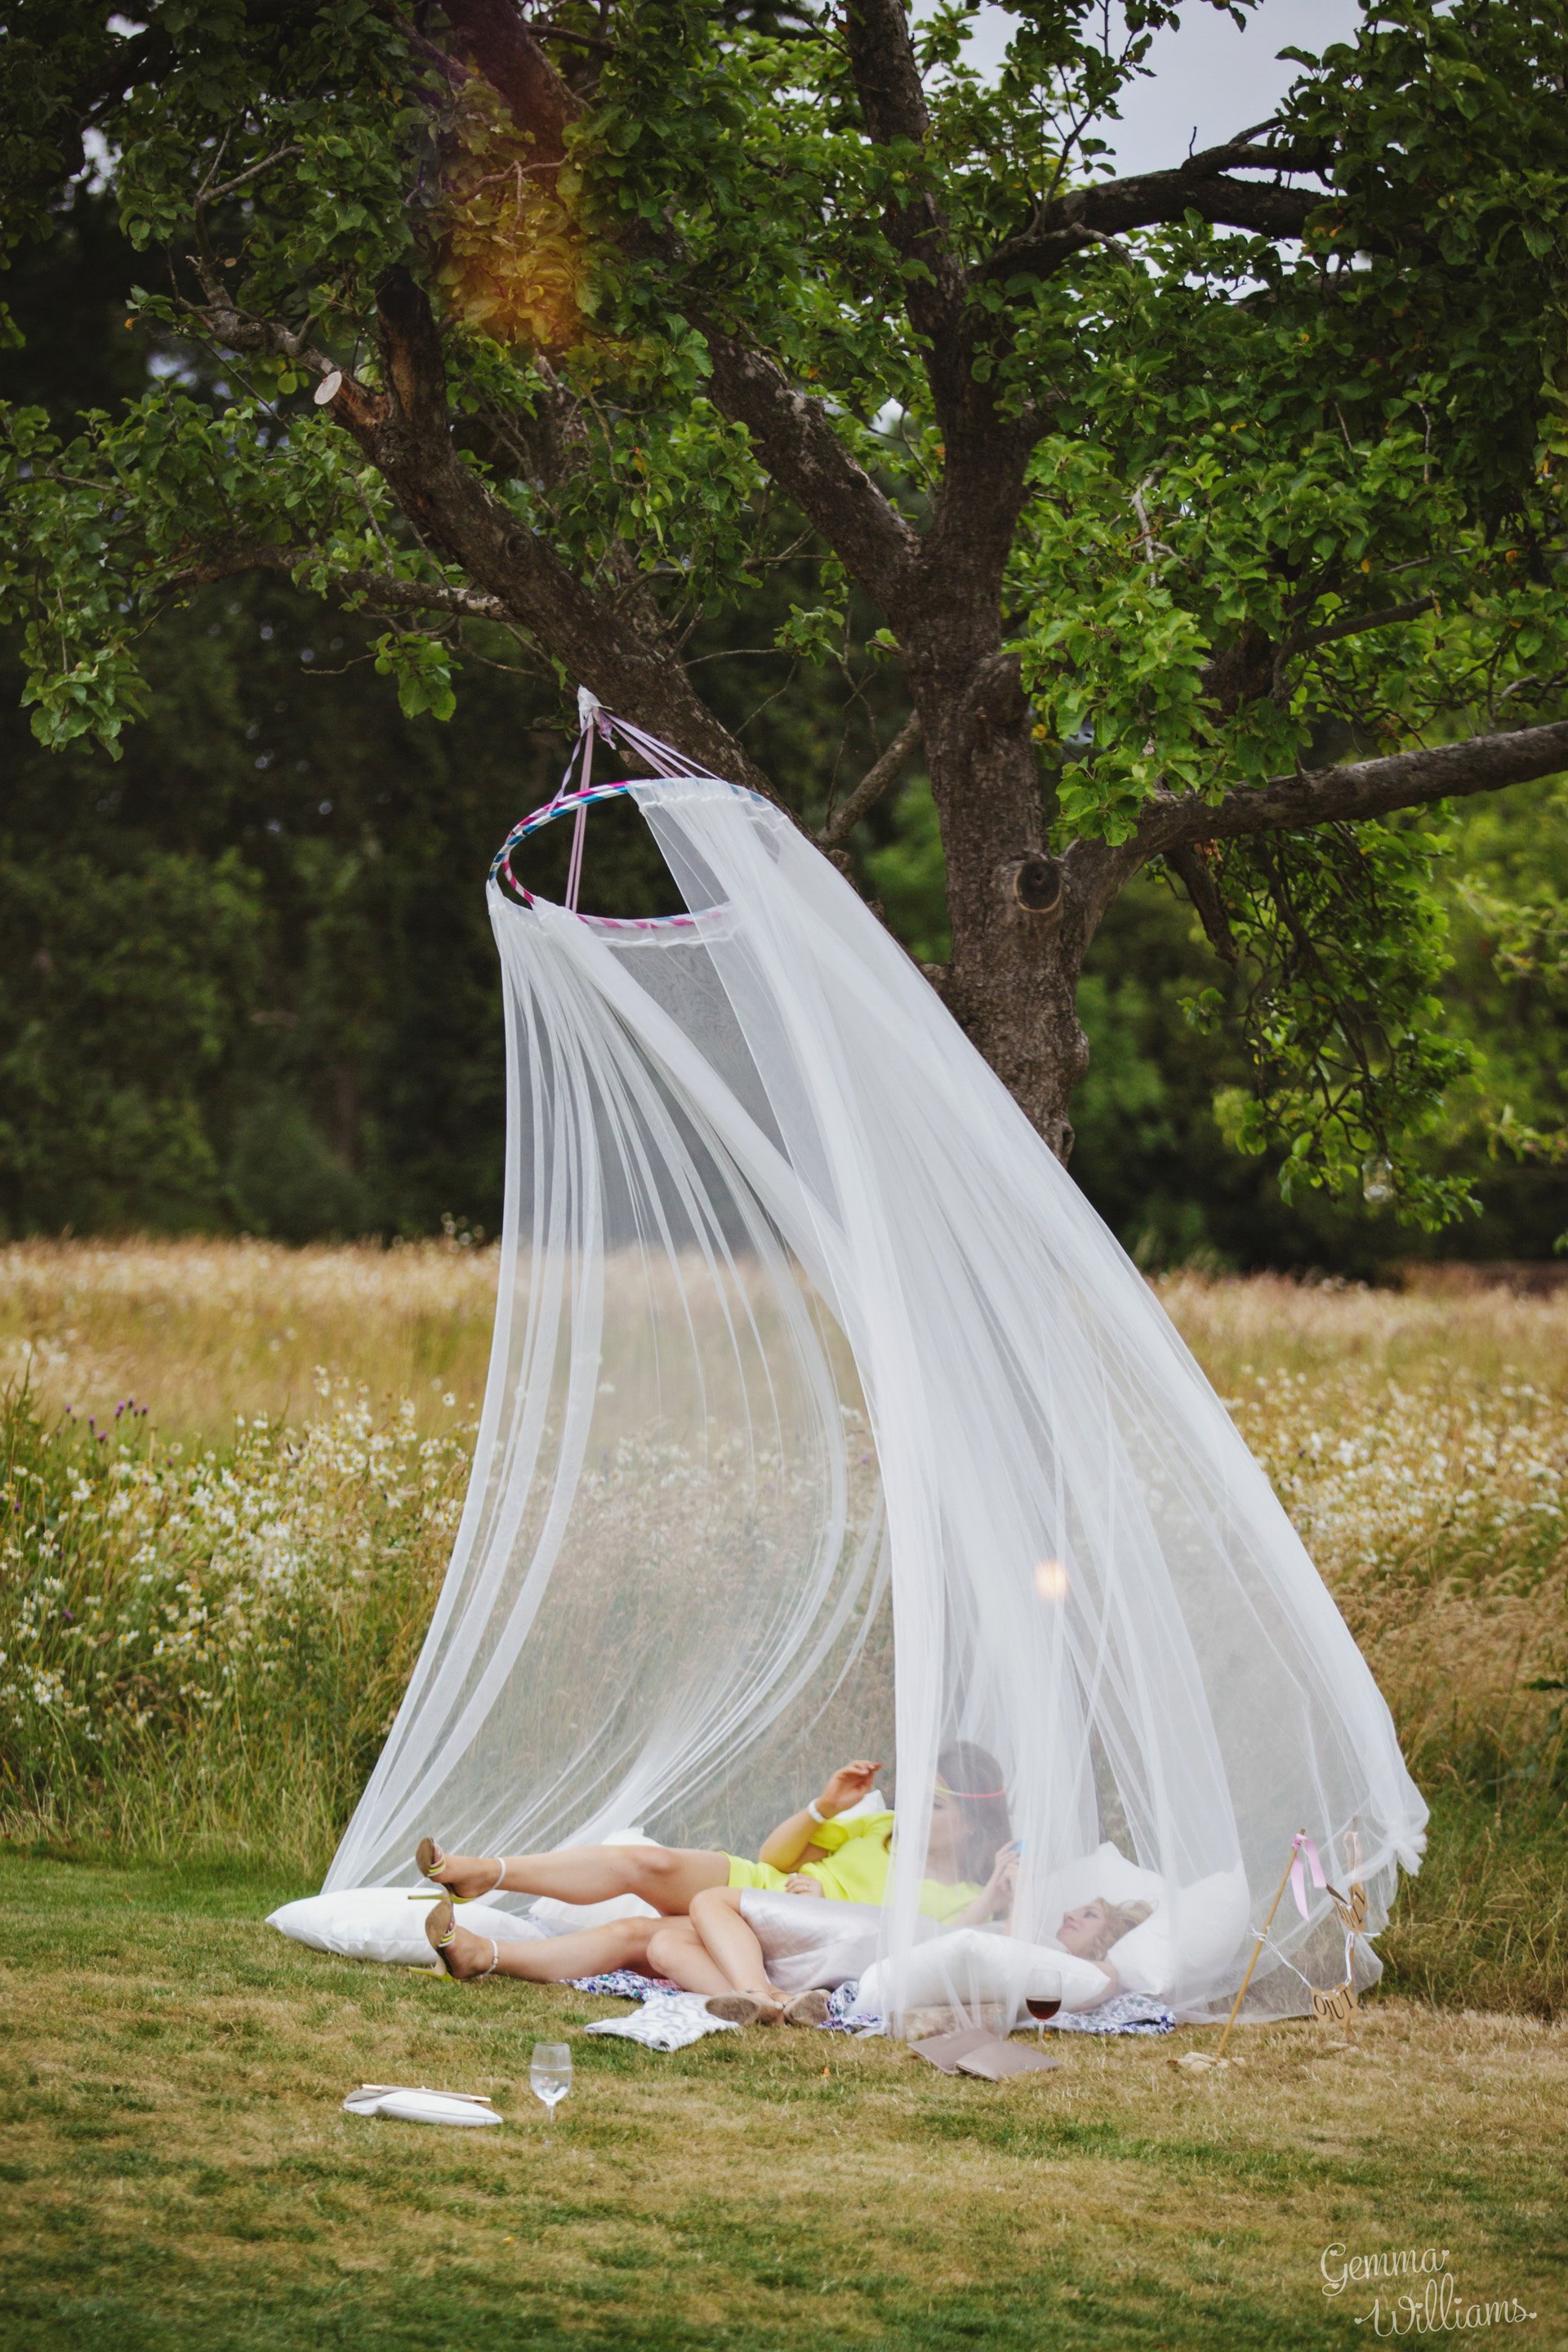 Guests chilling outside under a pretty mosquito net chill out seating area at an outdoor festival style wedding